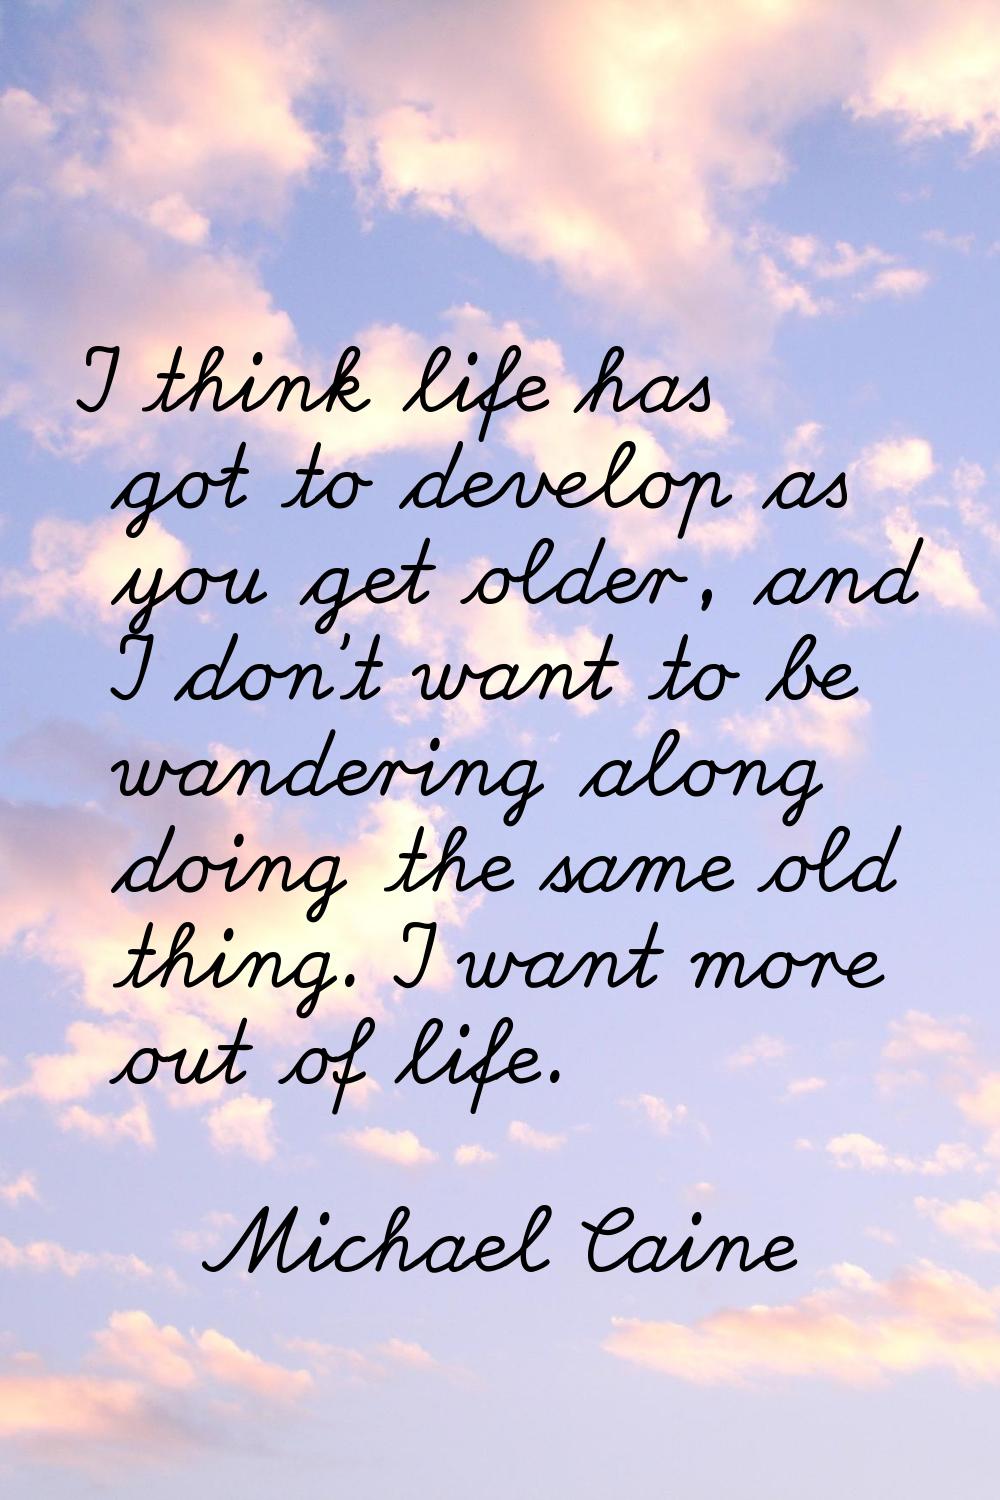 I think life has got to develop as you get older, and I don't want to be wandering along doing the 